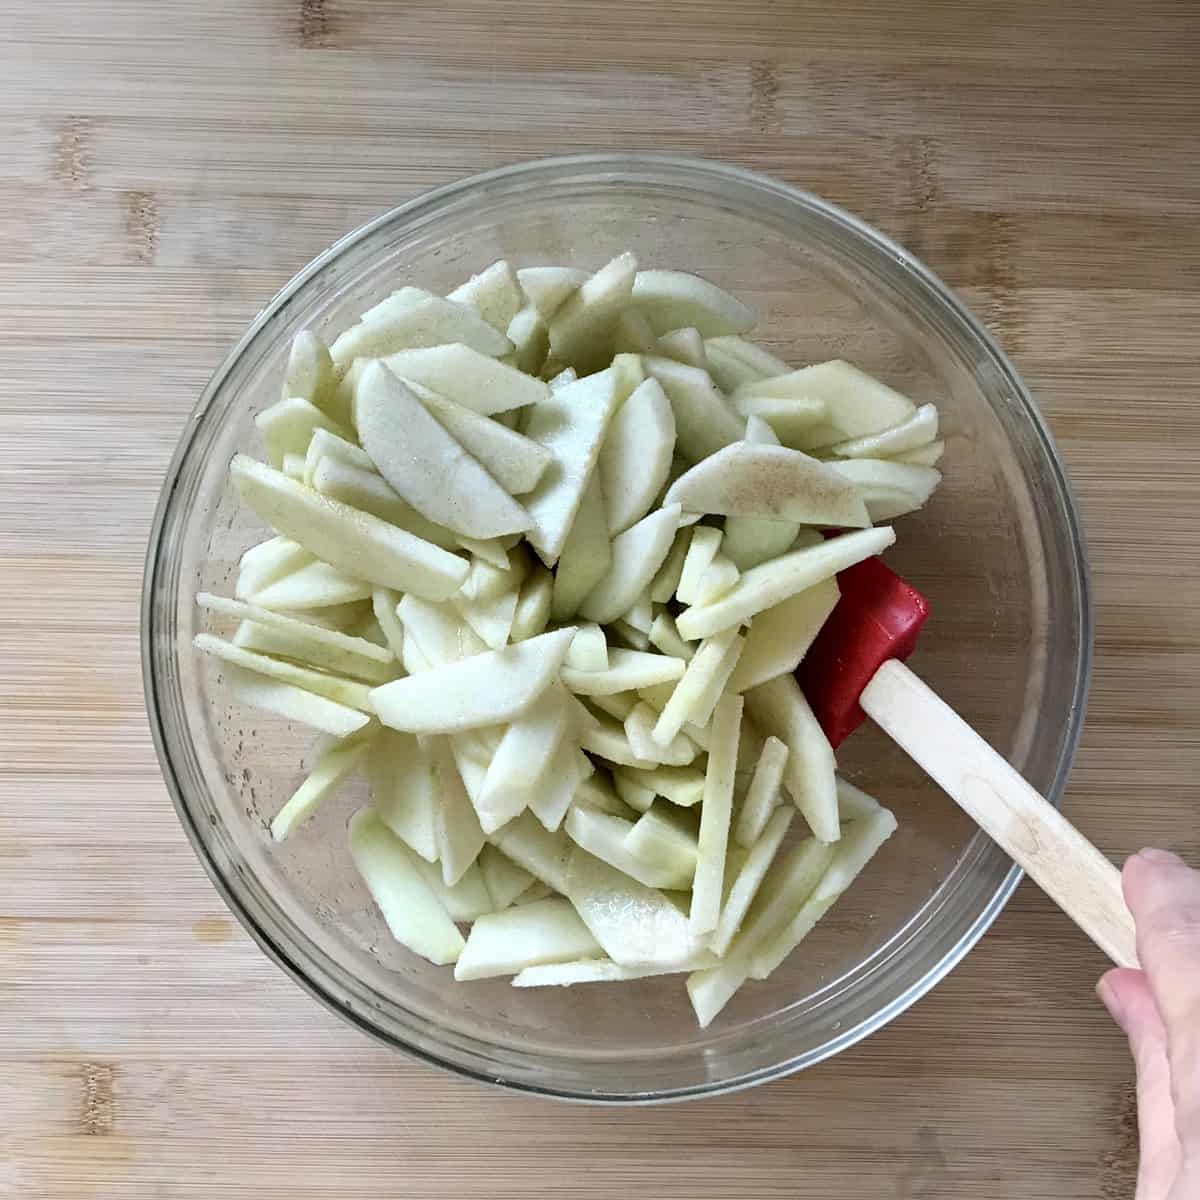 Sliced apples in a bowl.